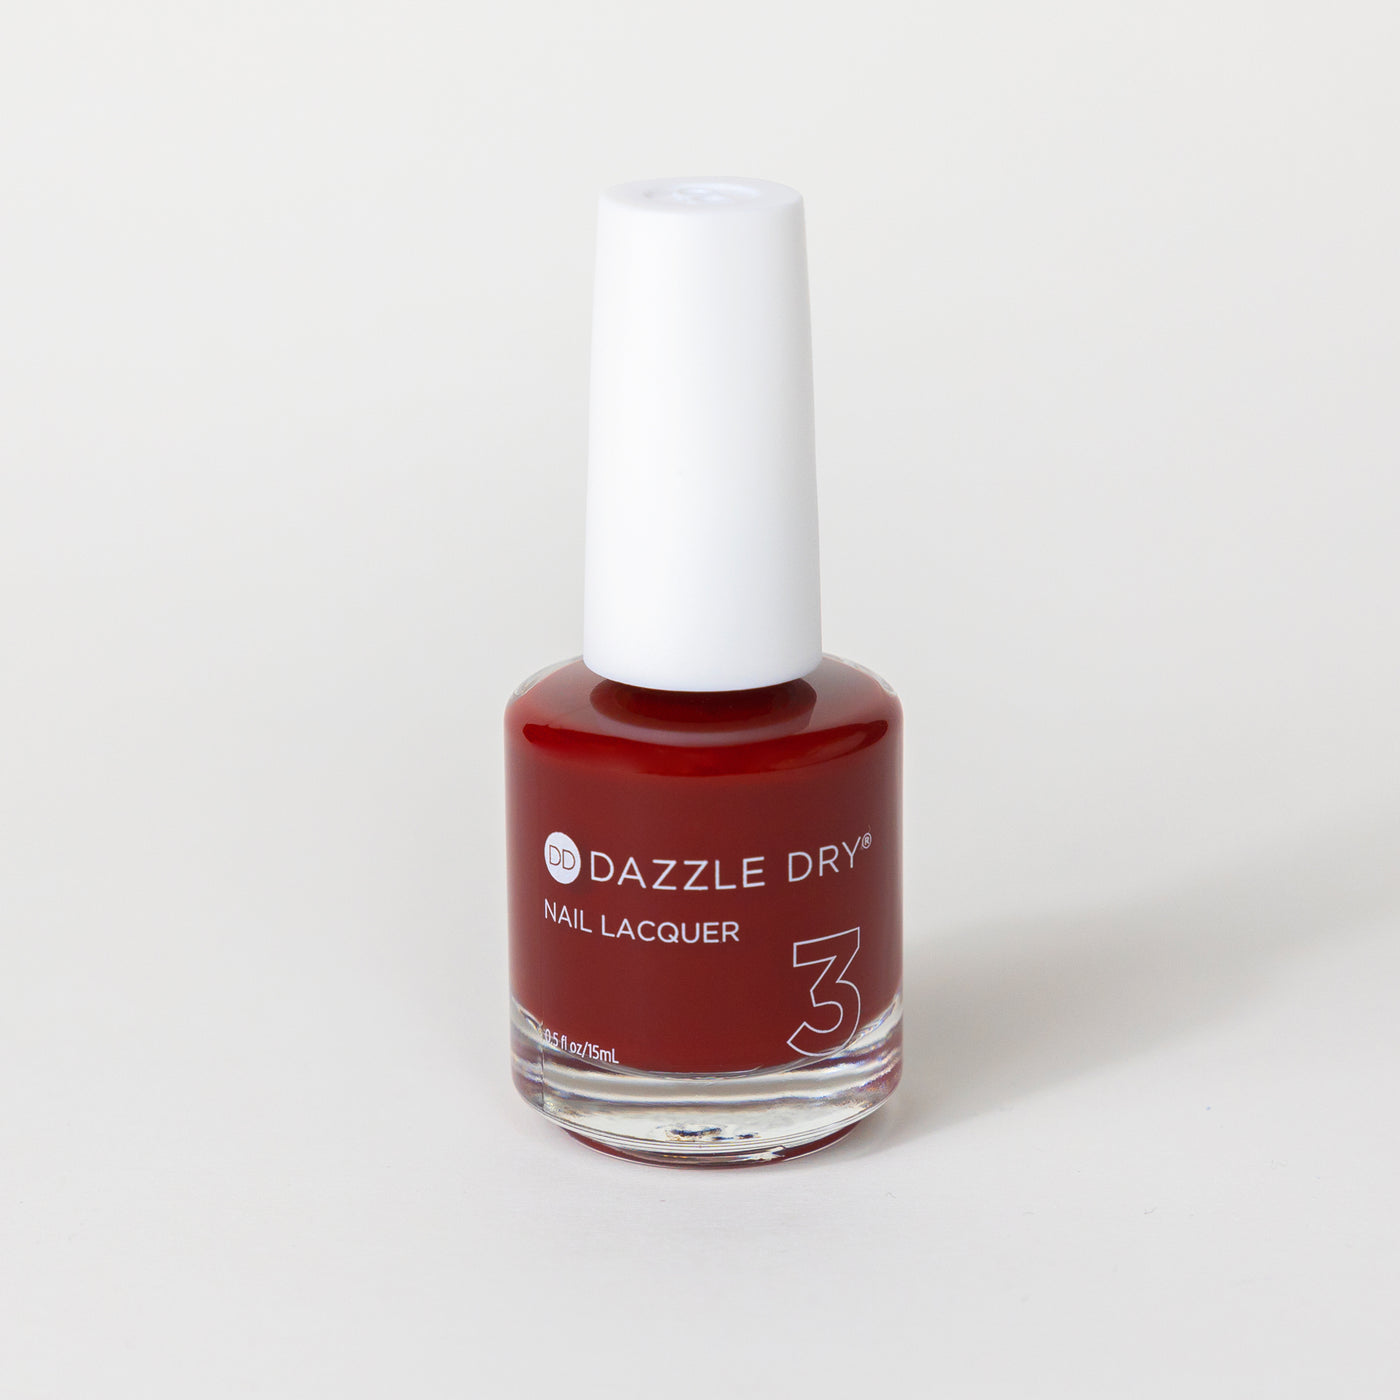 Fast Track Cherry - Dazzle Dry nail lacquer